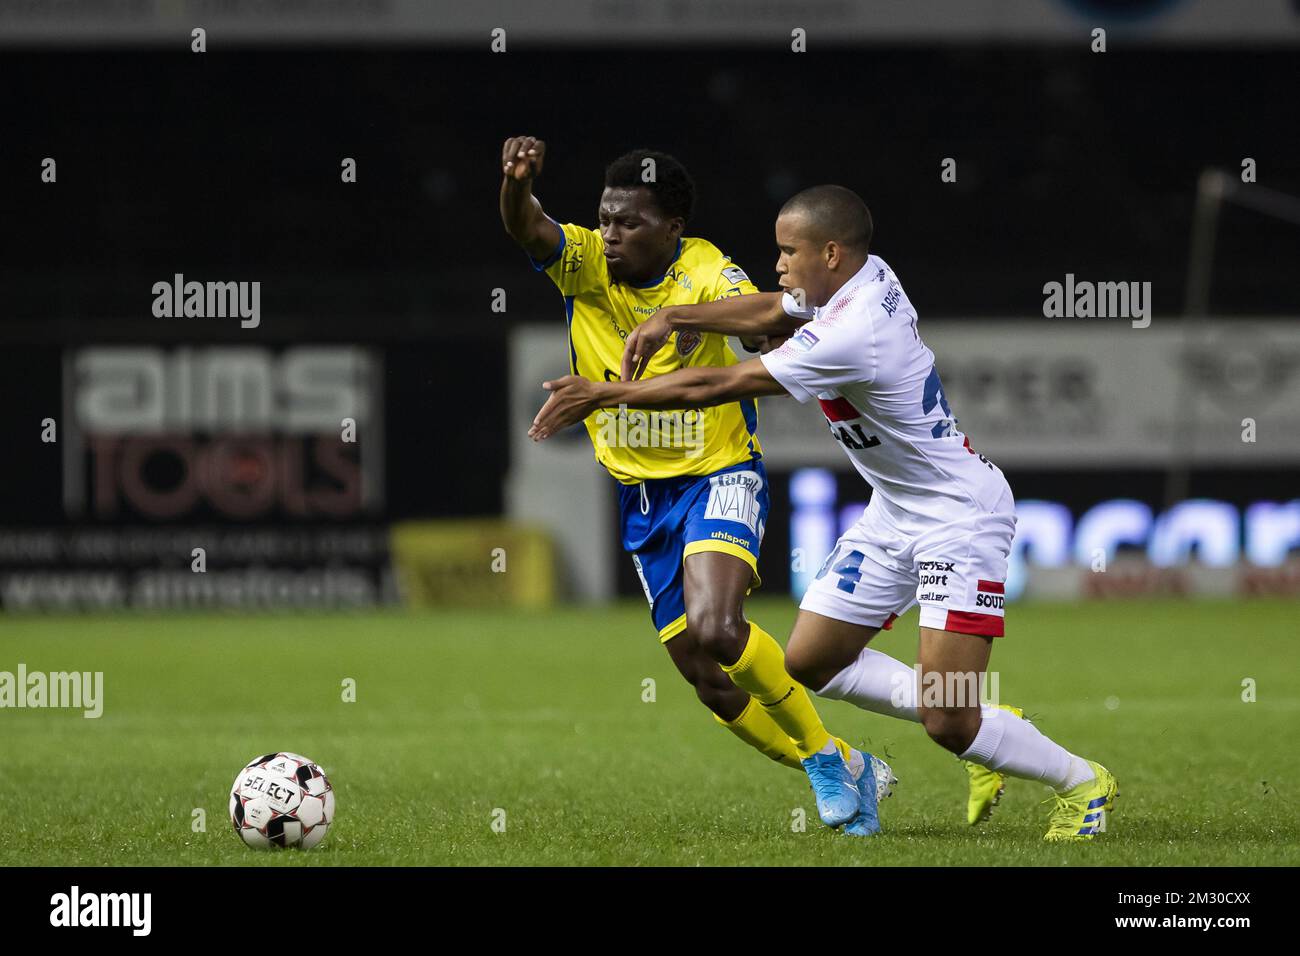 Waasland-Beveren's Thomas Agyepong and Westerlo's Kurt Abrahams fight for the ball during a soccer game between Waasland-Beveren and KVC Westerlo (1B), Tuesday 24 September 2019 in Beveren-Waas, in the 1/16th final of the 'Croky Cup' Belgian cup. BELGA PHOTO KRISTOF VAN ACCOM Stock Photo